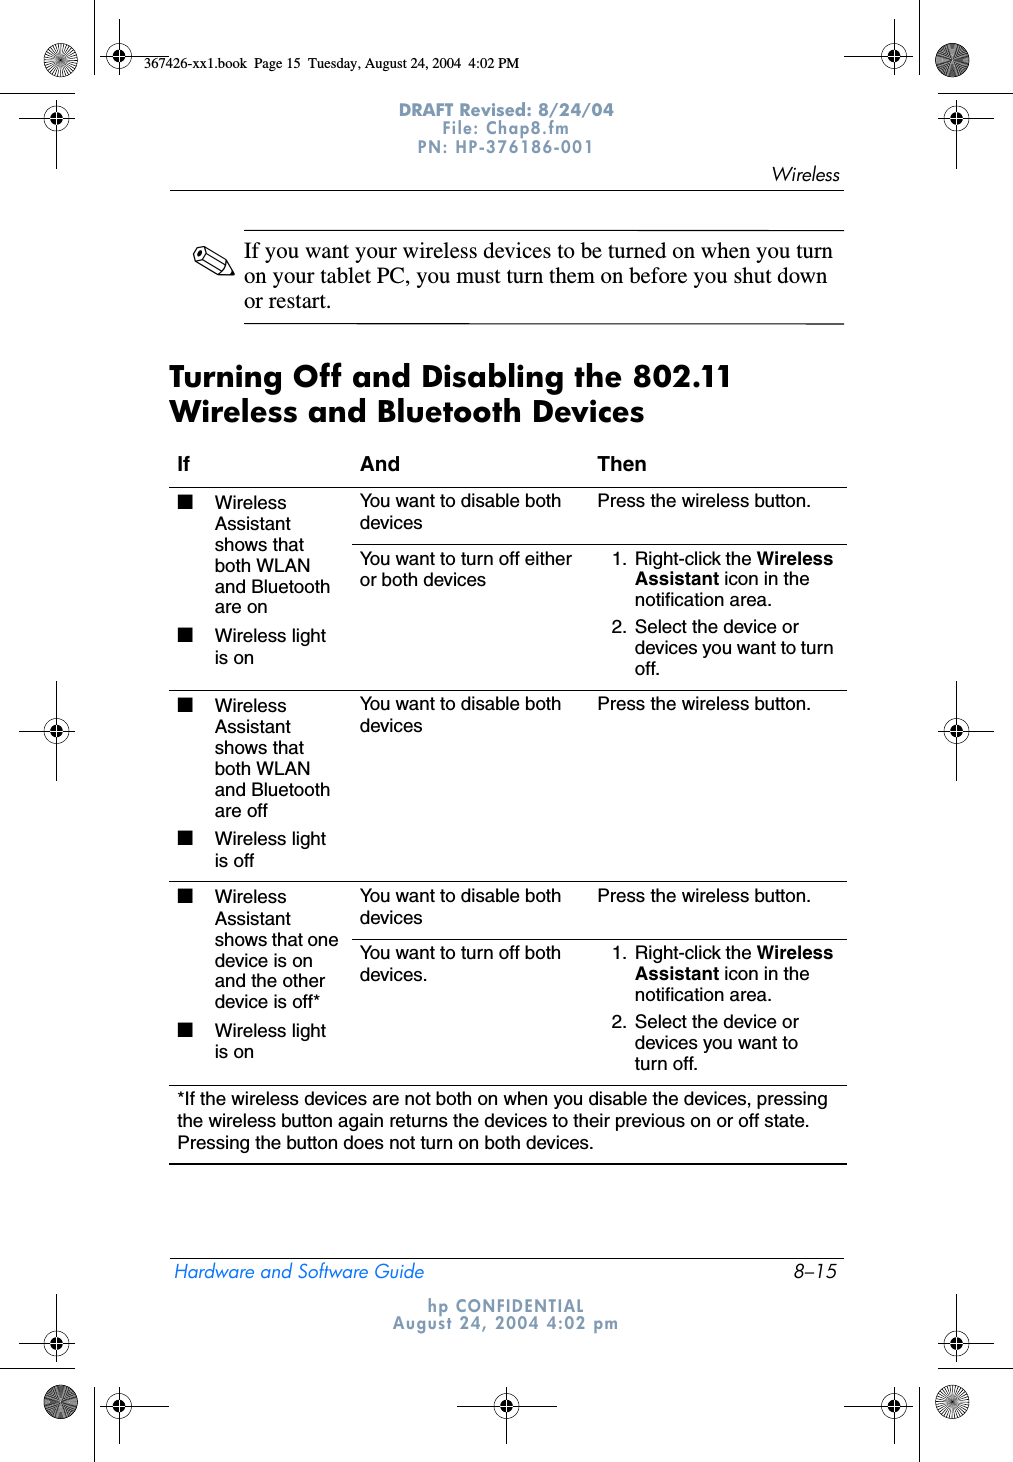 WirelessHardware and Software Guide 8–15DRAFT Revised: 8/24/04File: Chap8.fm PN: HP-376186-001 hp CONFIDENTIALAugust 24, 2004 4:02 pm✎If you want your wireless devices to be turned on when you turn on your tablet PC, you must turn them on before you shut down or restart.Turning Off and Disabling the 802.11 Wireless and Bluetooth DevicesIf And Then■Wireless Assistant shows that both WLAN and Bluetooth are on■Wireless light is onYou want to disable both devicesPress the wireless button.You want to turn off either or both devices1. Right-click the Wireless Assistant icon in the notification area.2. Select the device or devices you want to turn off.■Wireless Assistant shows that both WLAN and Bluetooth are off■Wireless light is offYou want to disable both devicesPress the wireless button.■Wireless Assistant shows that one device is on and the other device is off*■Wireless light is onYou want to disable both devicesPress the wireless button.You want to turn off both devices.1. Right-click the Wireless Assistant icon in the notification area.2. Select the device or devices you want to turn off.*If the wireless devices are not both on when you disable the devices, pressing the wireless button again returns the devices to their previous on or off state. Pressing the button does not turn on both devices.367426-xx1.book  Page 15  Tuesday, August 24, 2004  4:02 PM